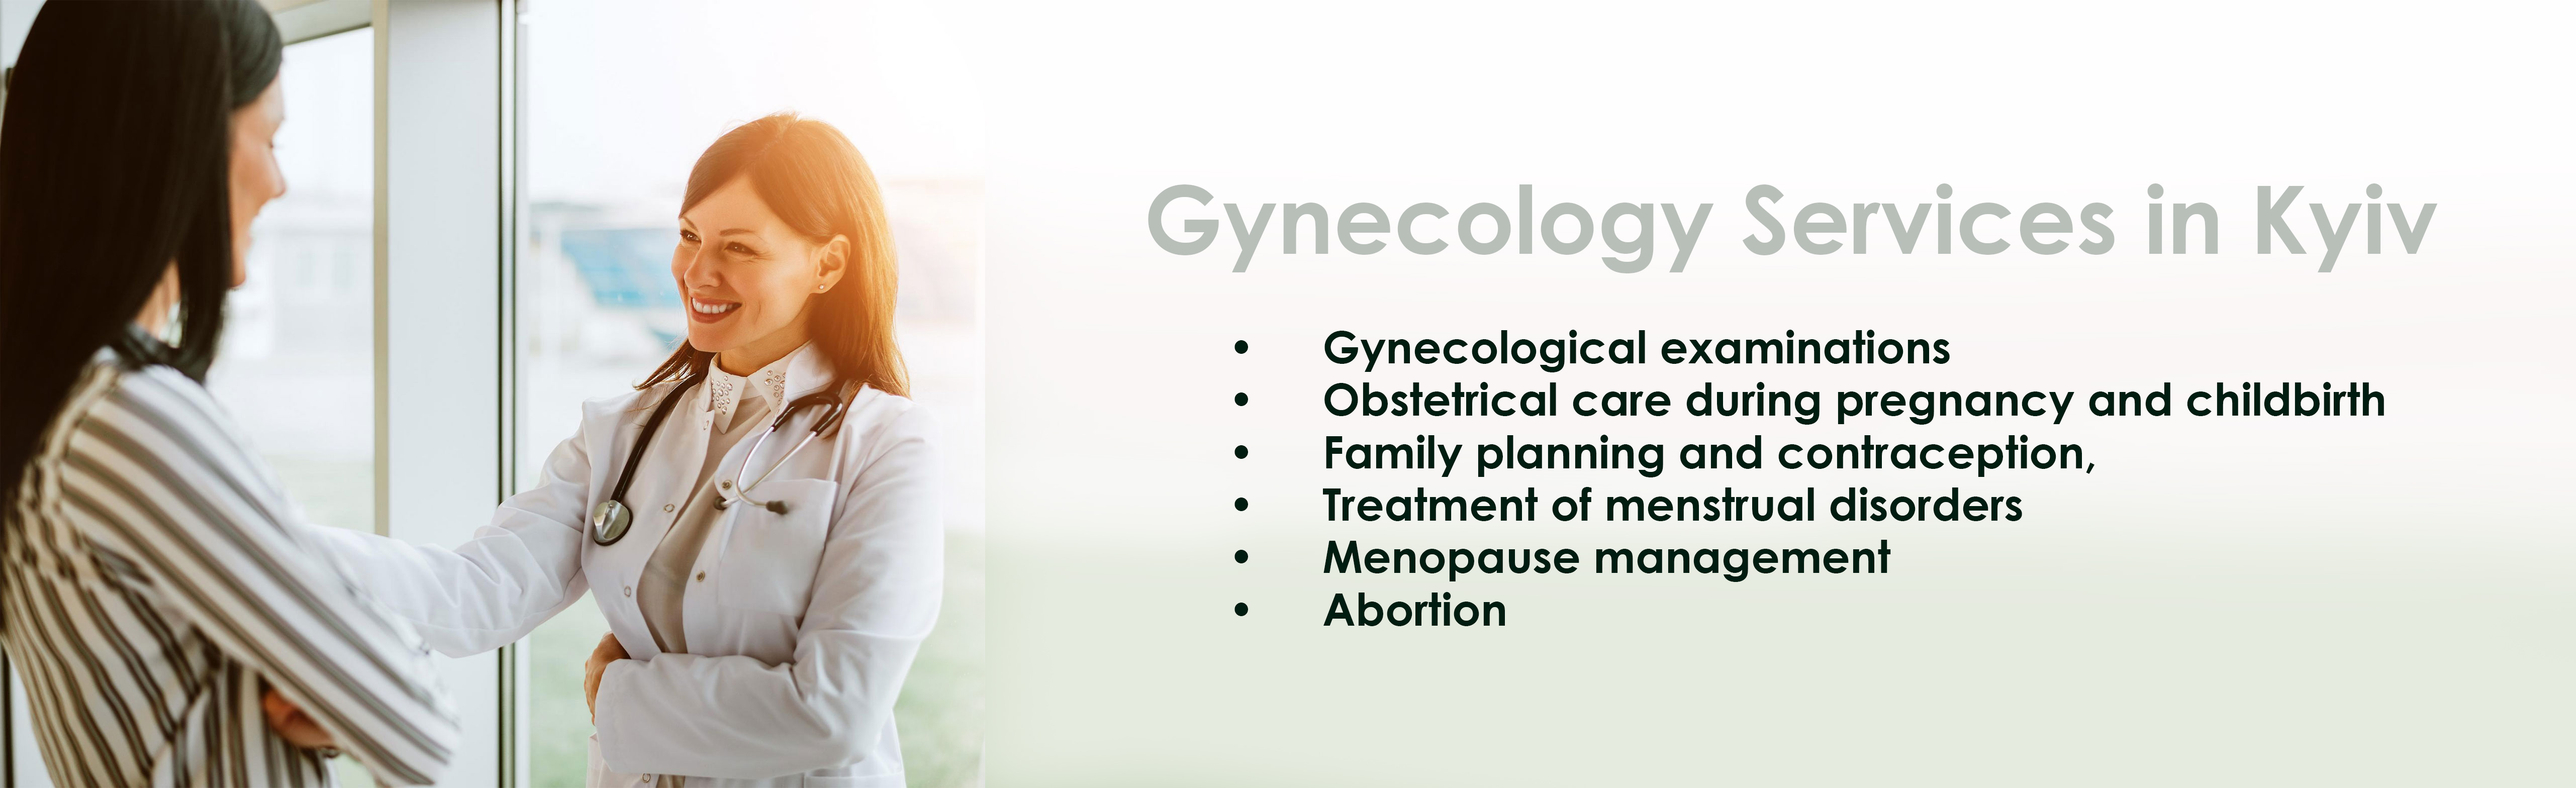 Gynecology Services in Kyiv